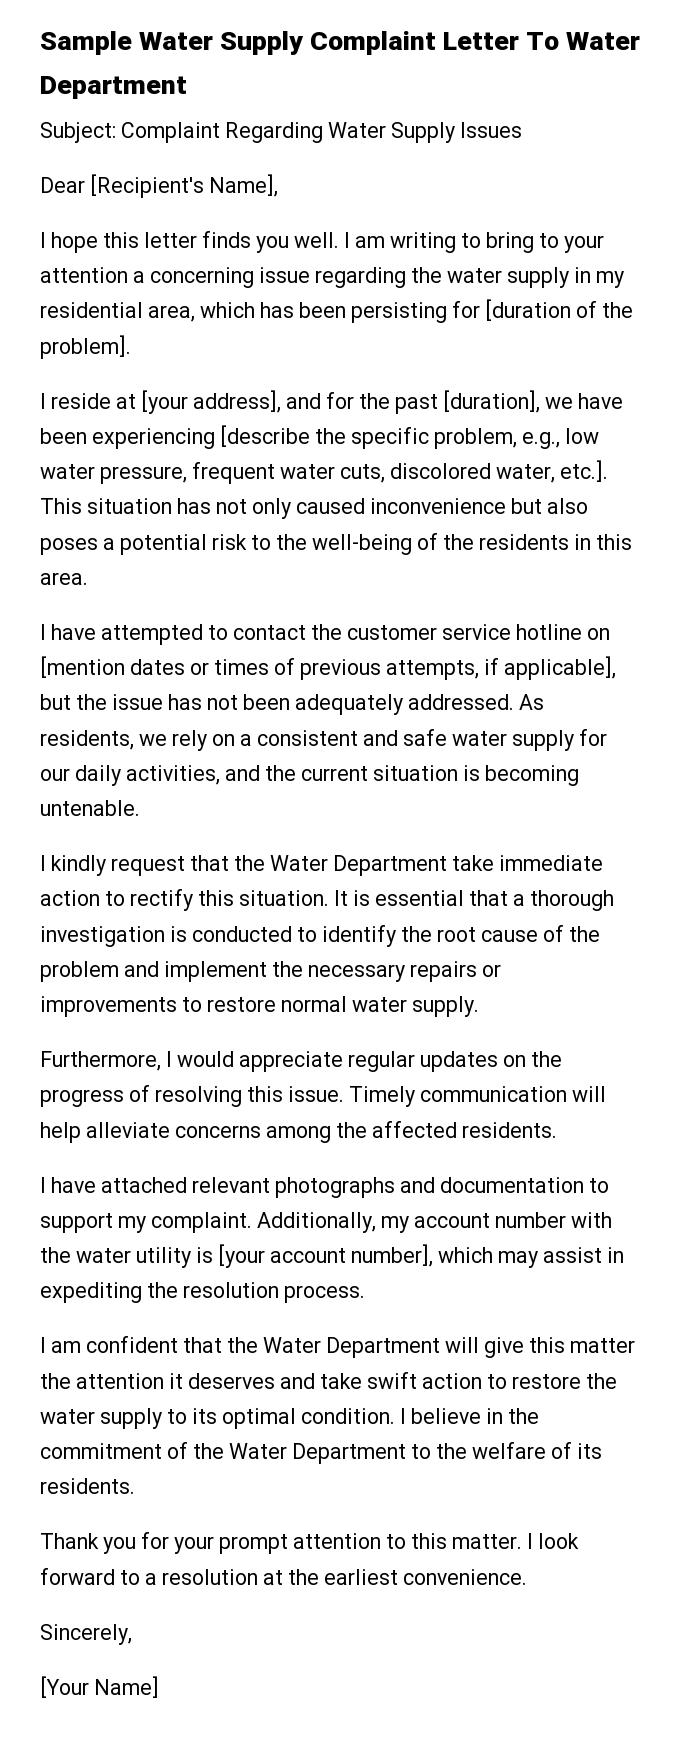 Sample Water Supply Complaint Letter To Water Department